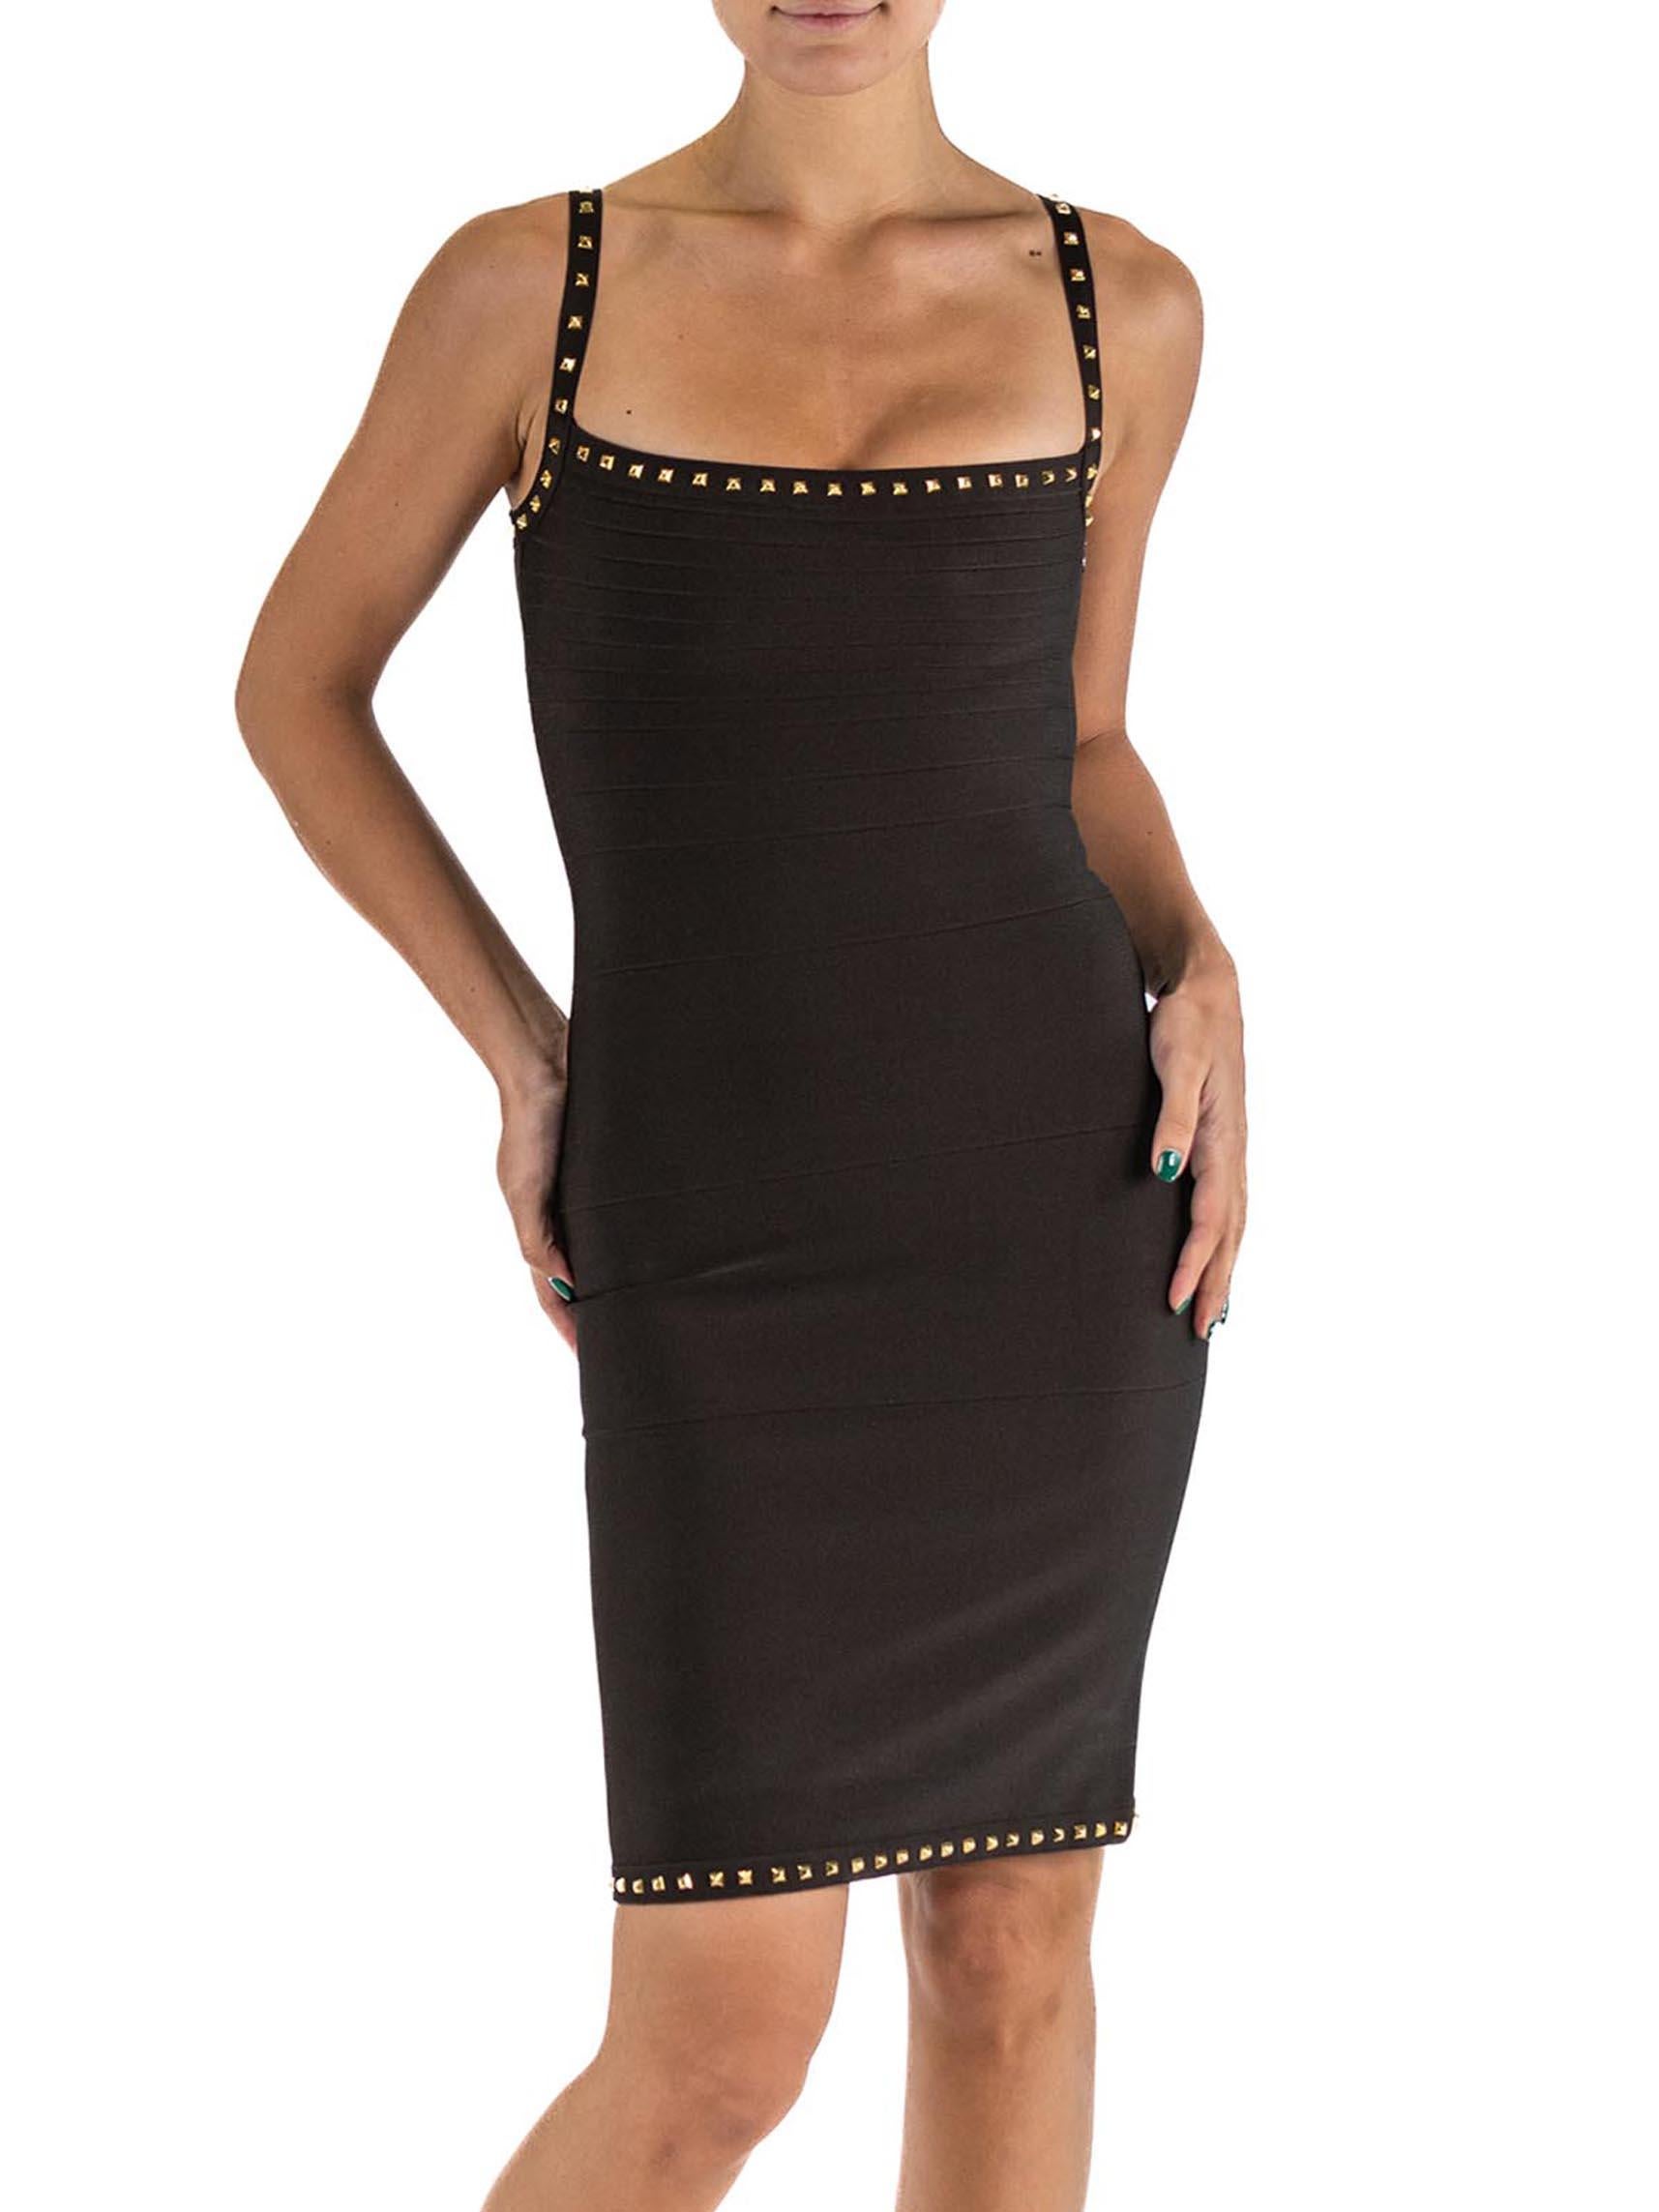 Women's 1990S HERVE LEGER Dark Chocolate Brown Rayon Blend Cocktail Dress With Gold Stu For Sale